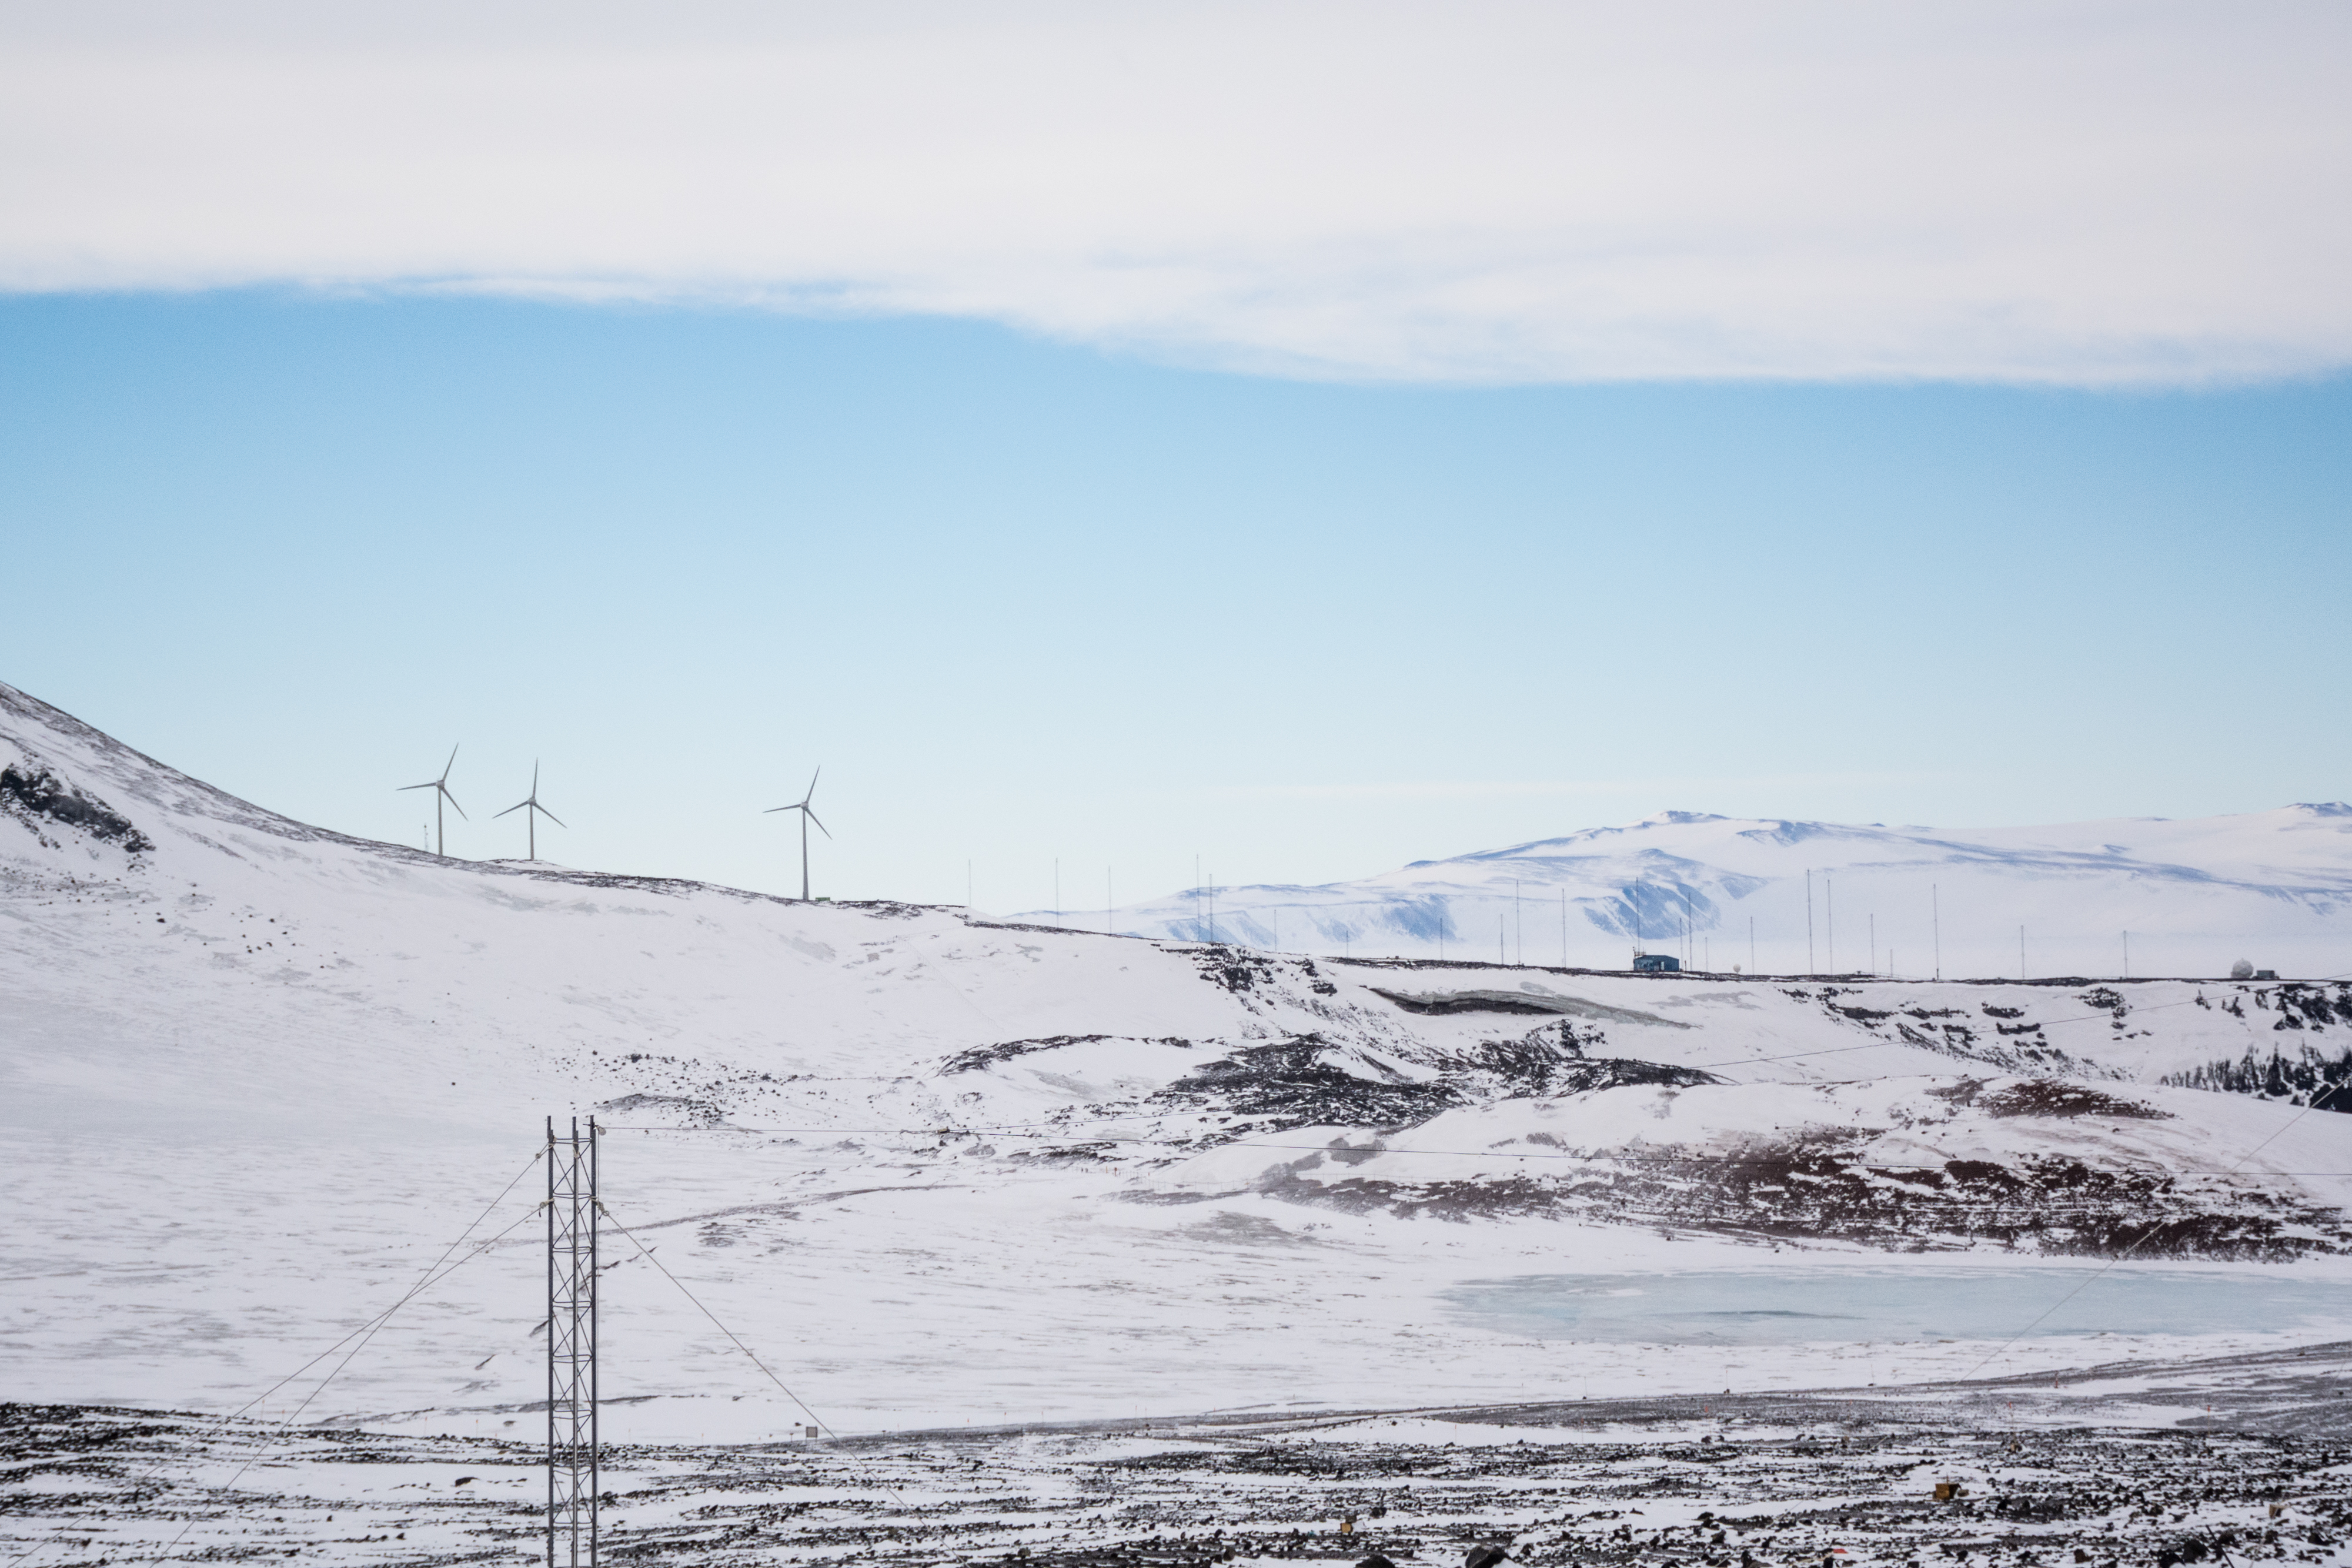 A snow-dusted landscape with wind turbines in the distance.